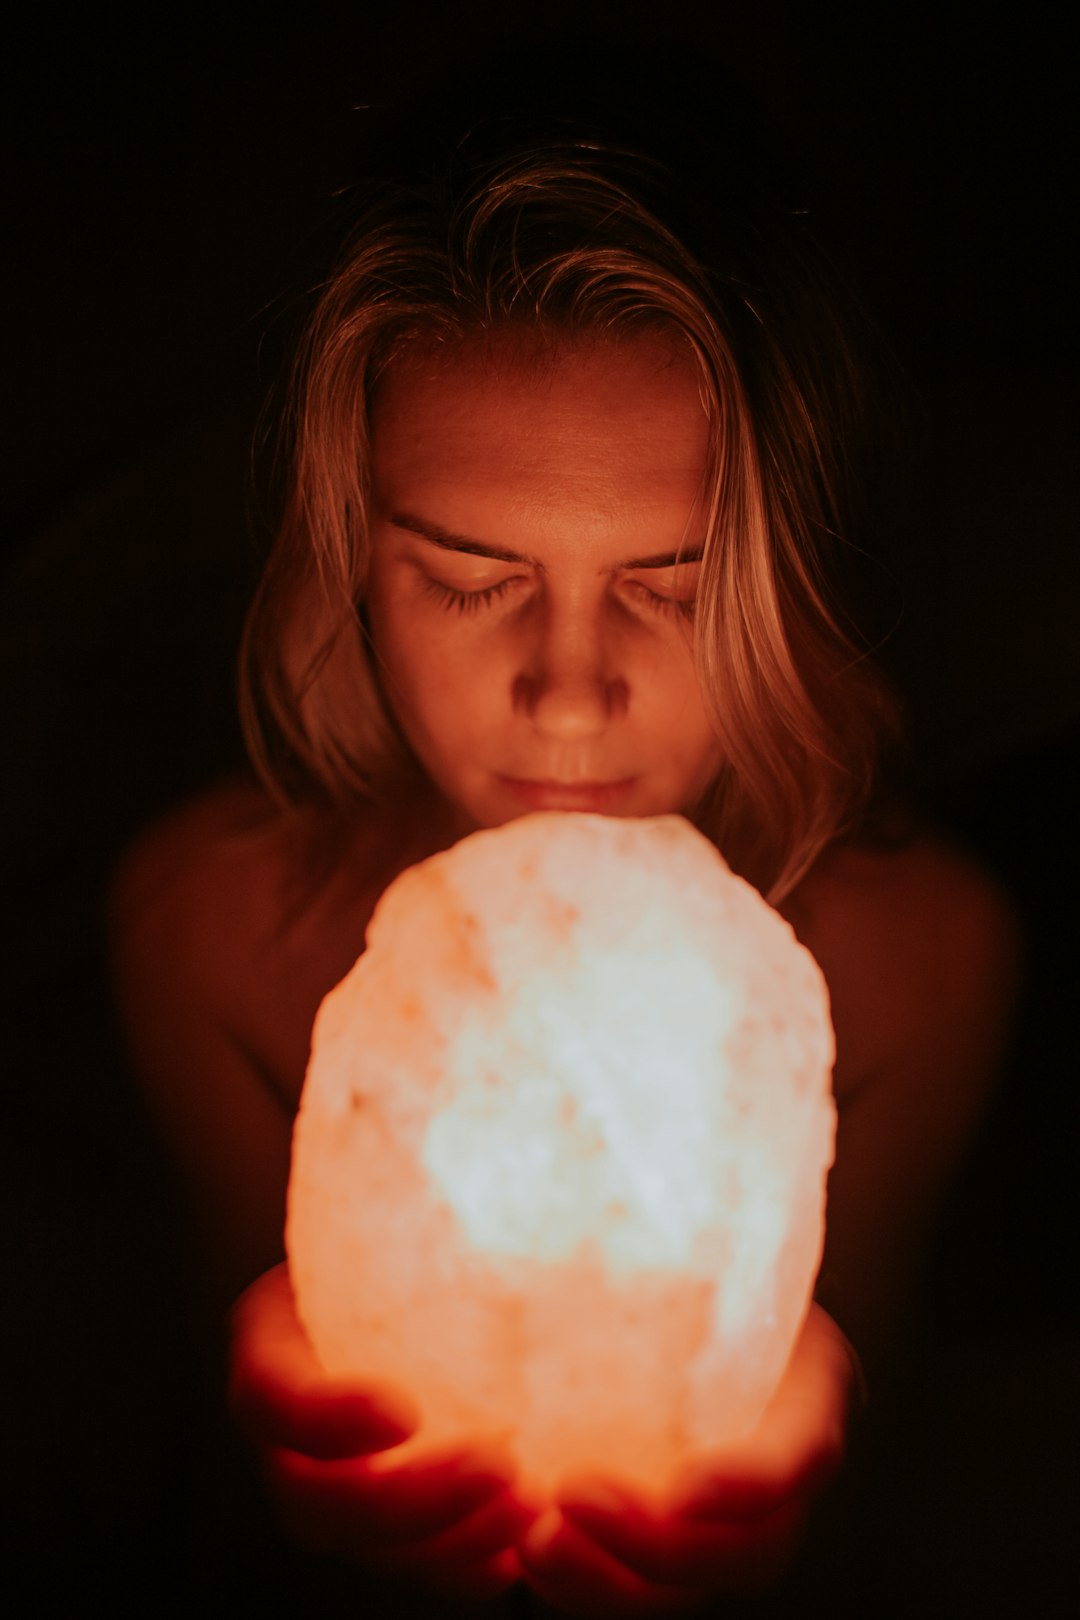 salt lamp - All pictures edited with my presets that you can find on my website in BIO